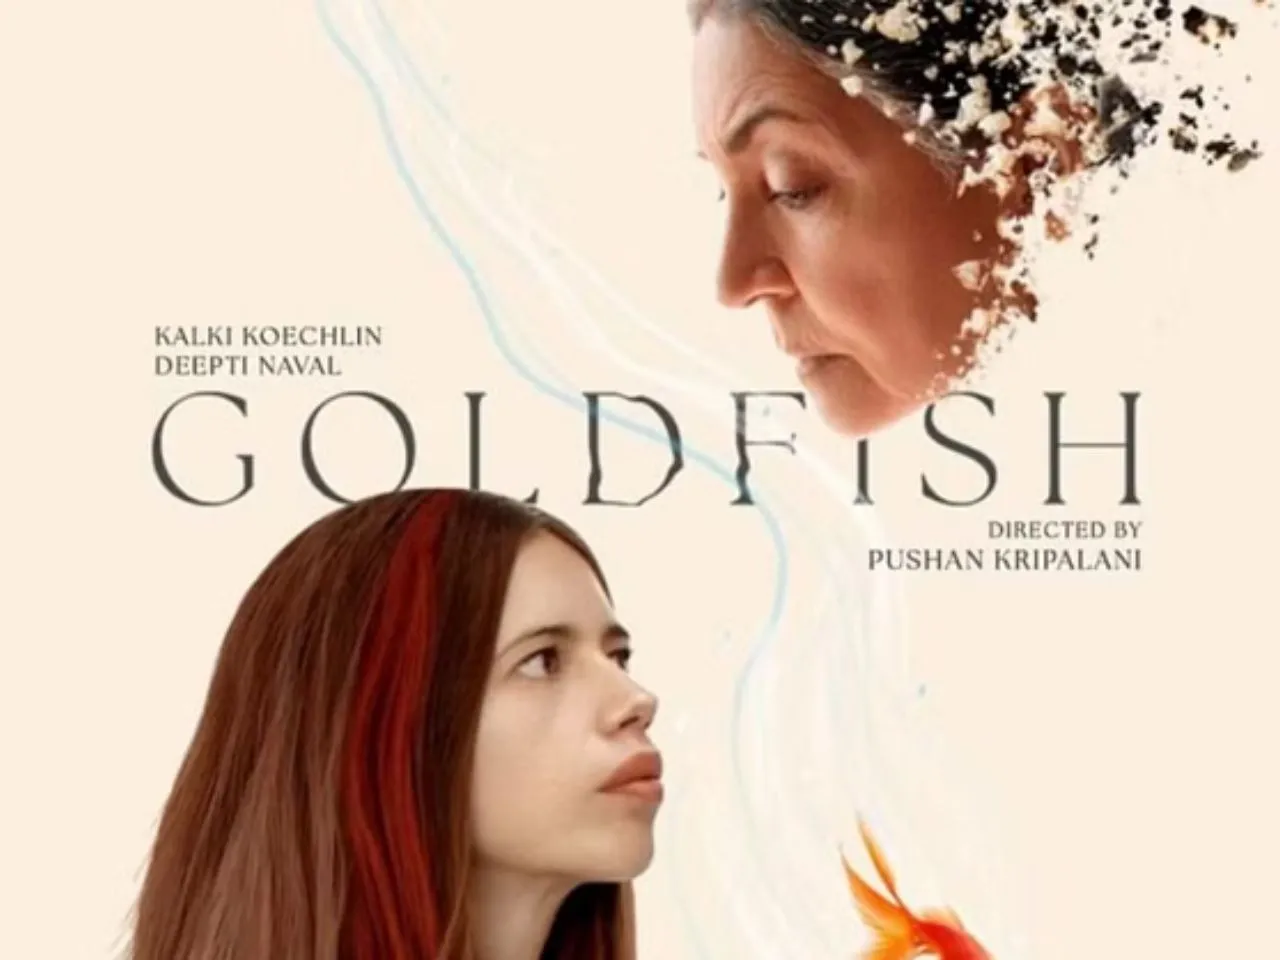 Goldfish review: An overwhelming film that explores dementia and damaged relationships